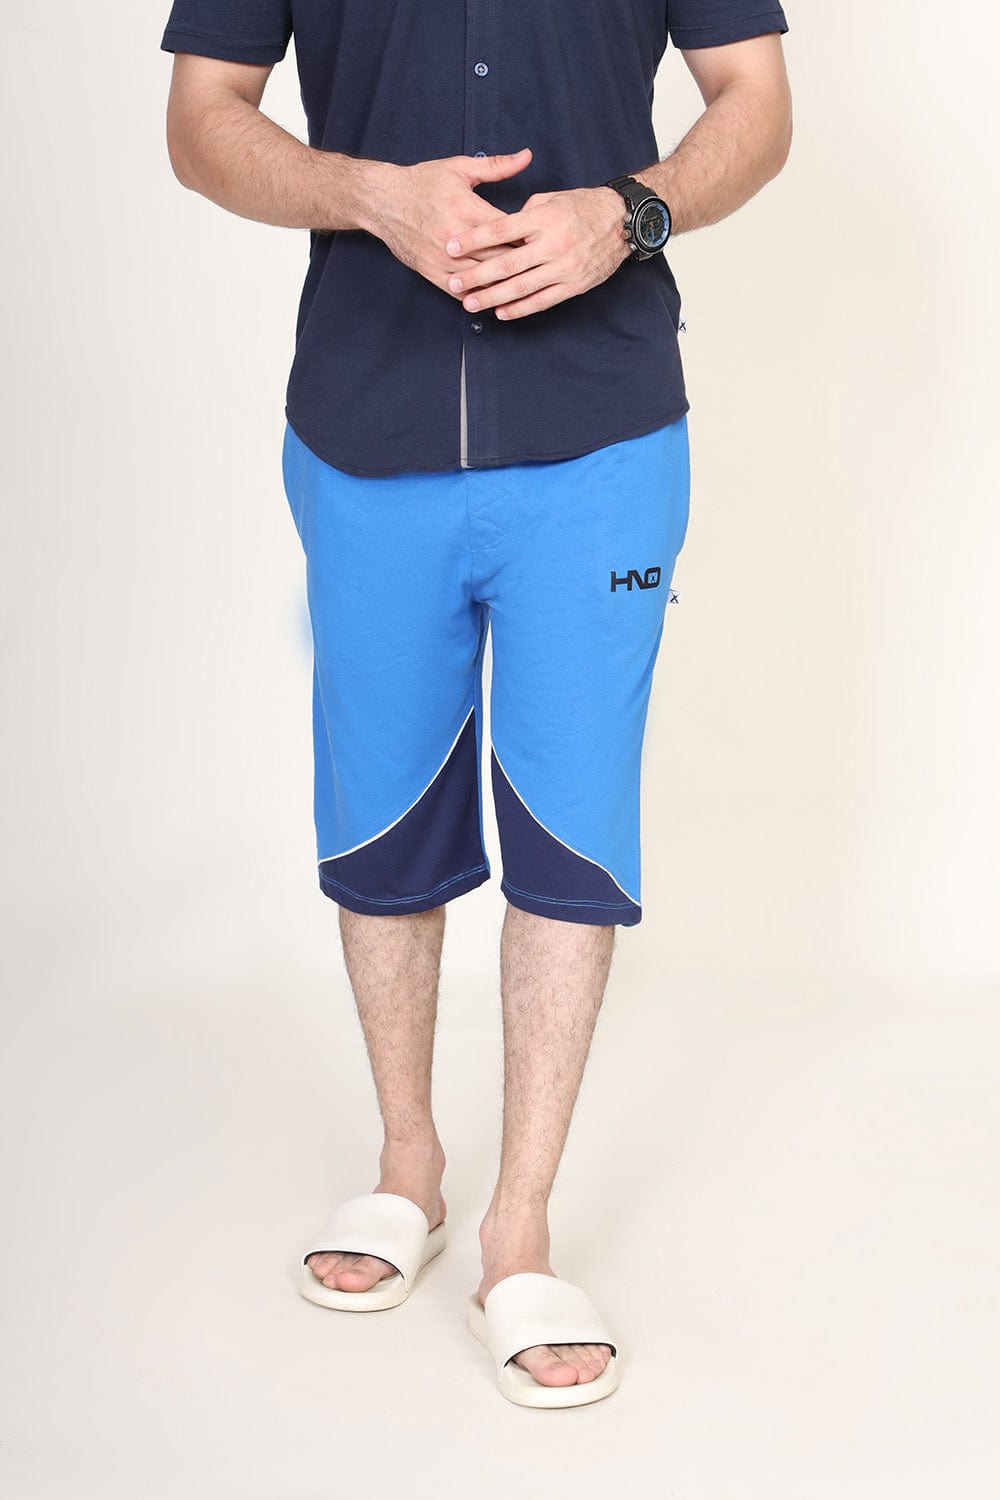 Hope Not Out by Shahid Afridi Men Shorts Man Royal Blue Panneled Knit Short